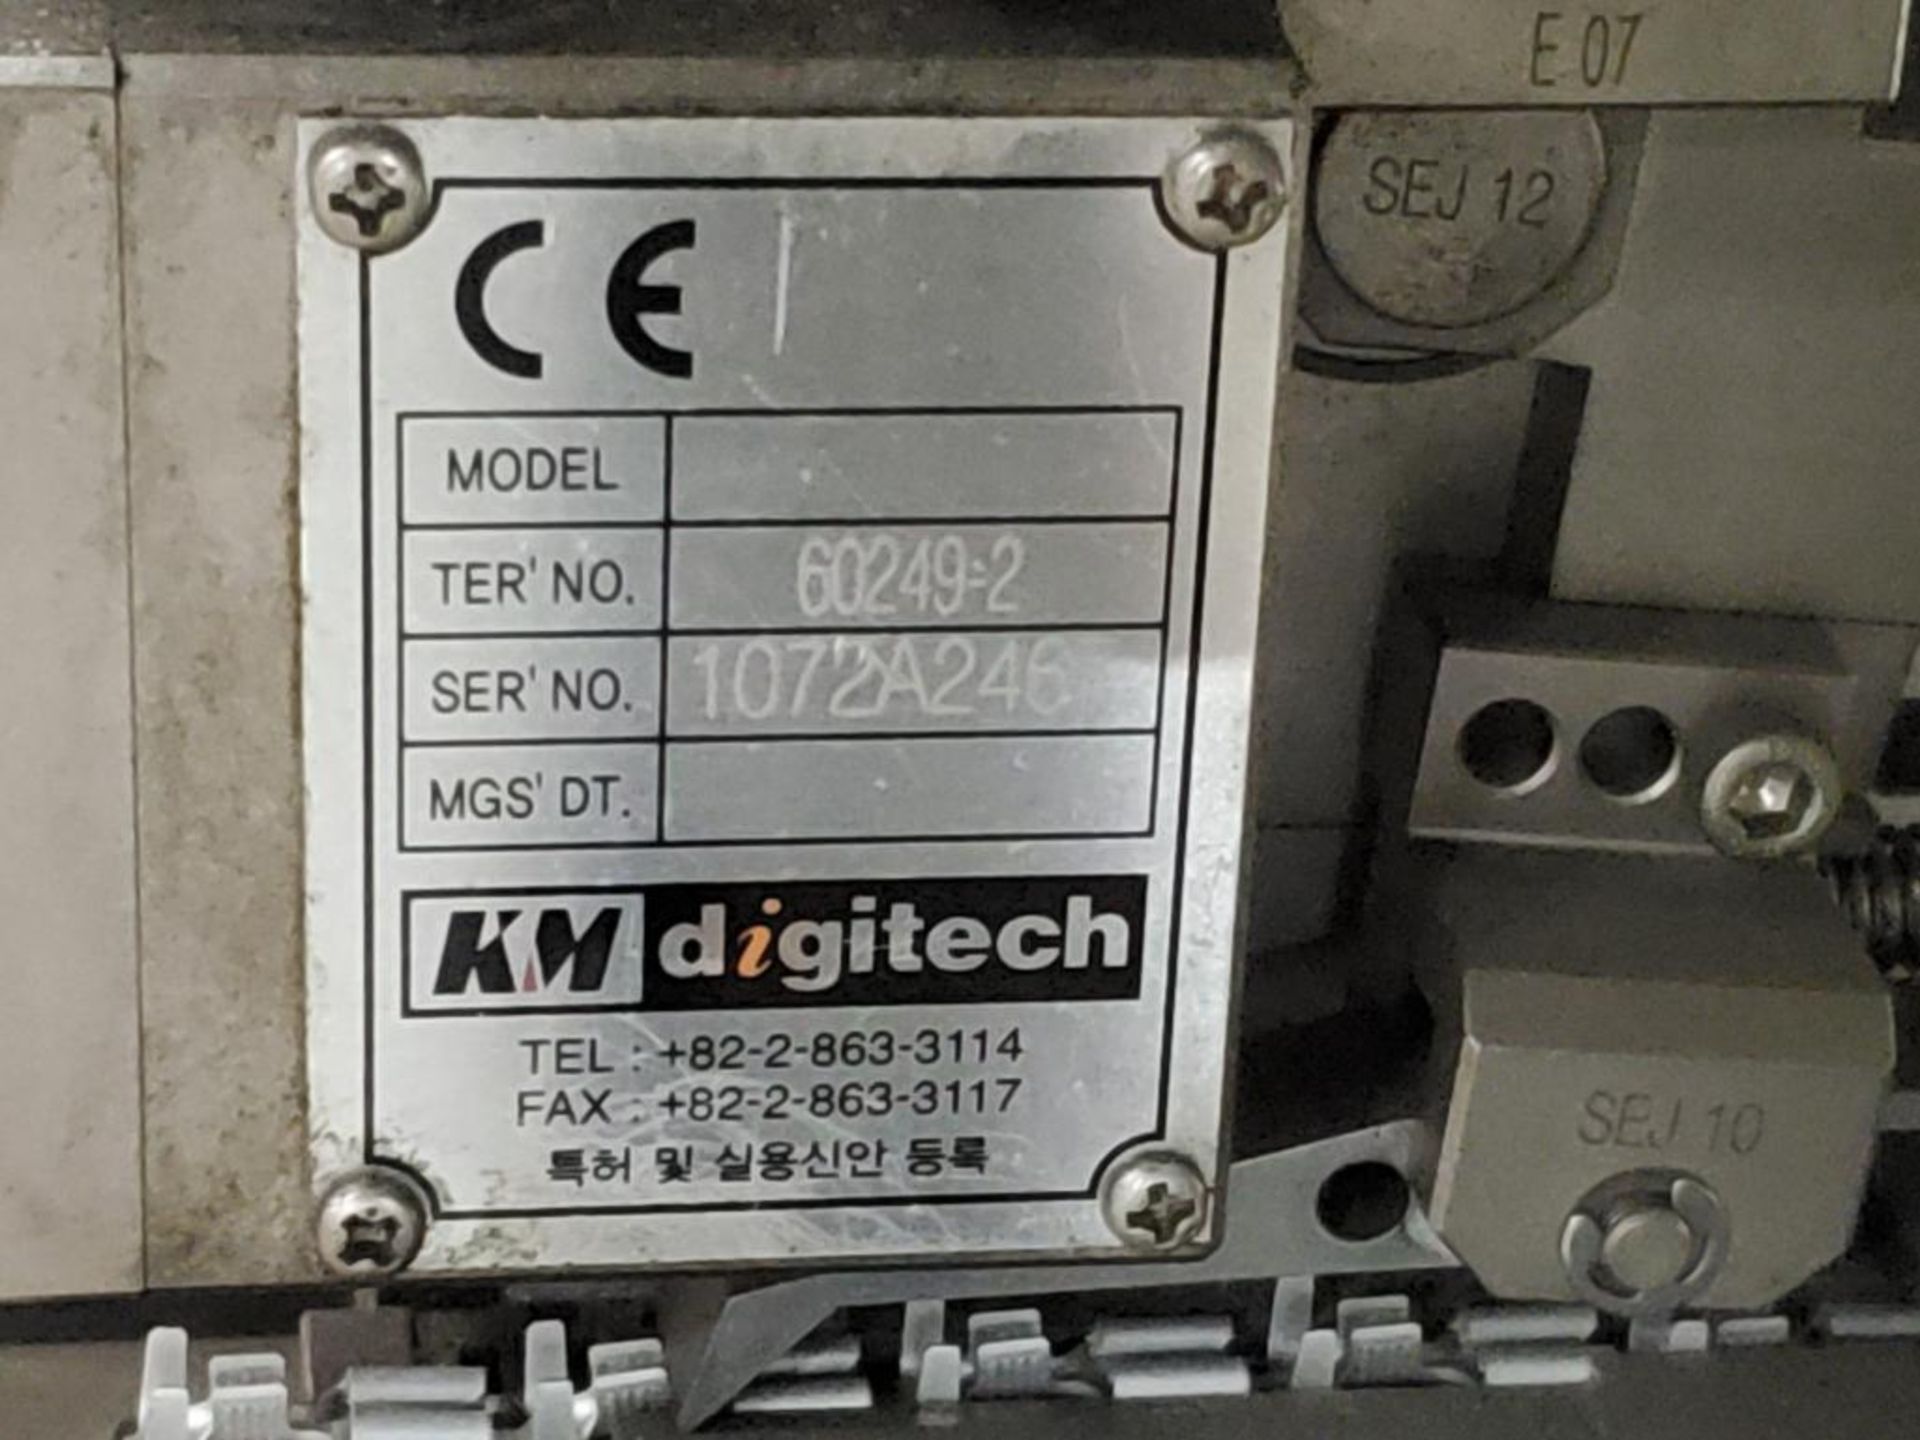 KM Digitech terminal crimping machine. Model KM-802N. Includes spade connector die as pictured. - Image 4 of 10